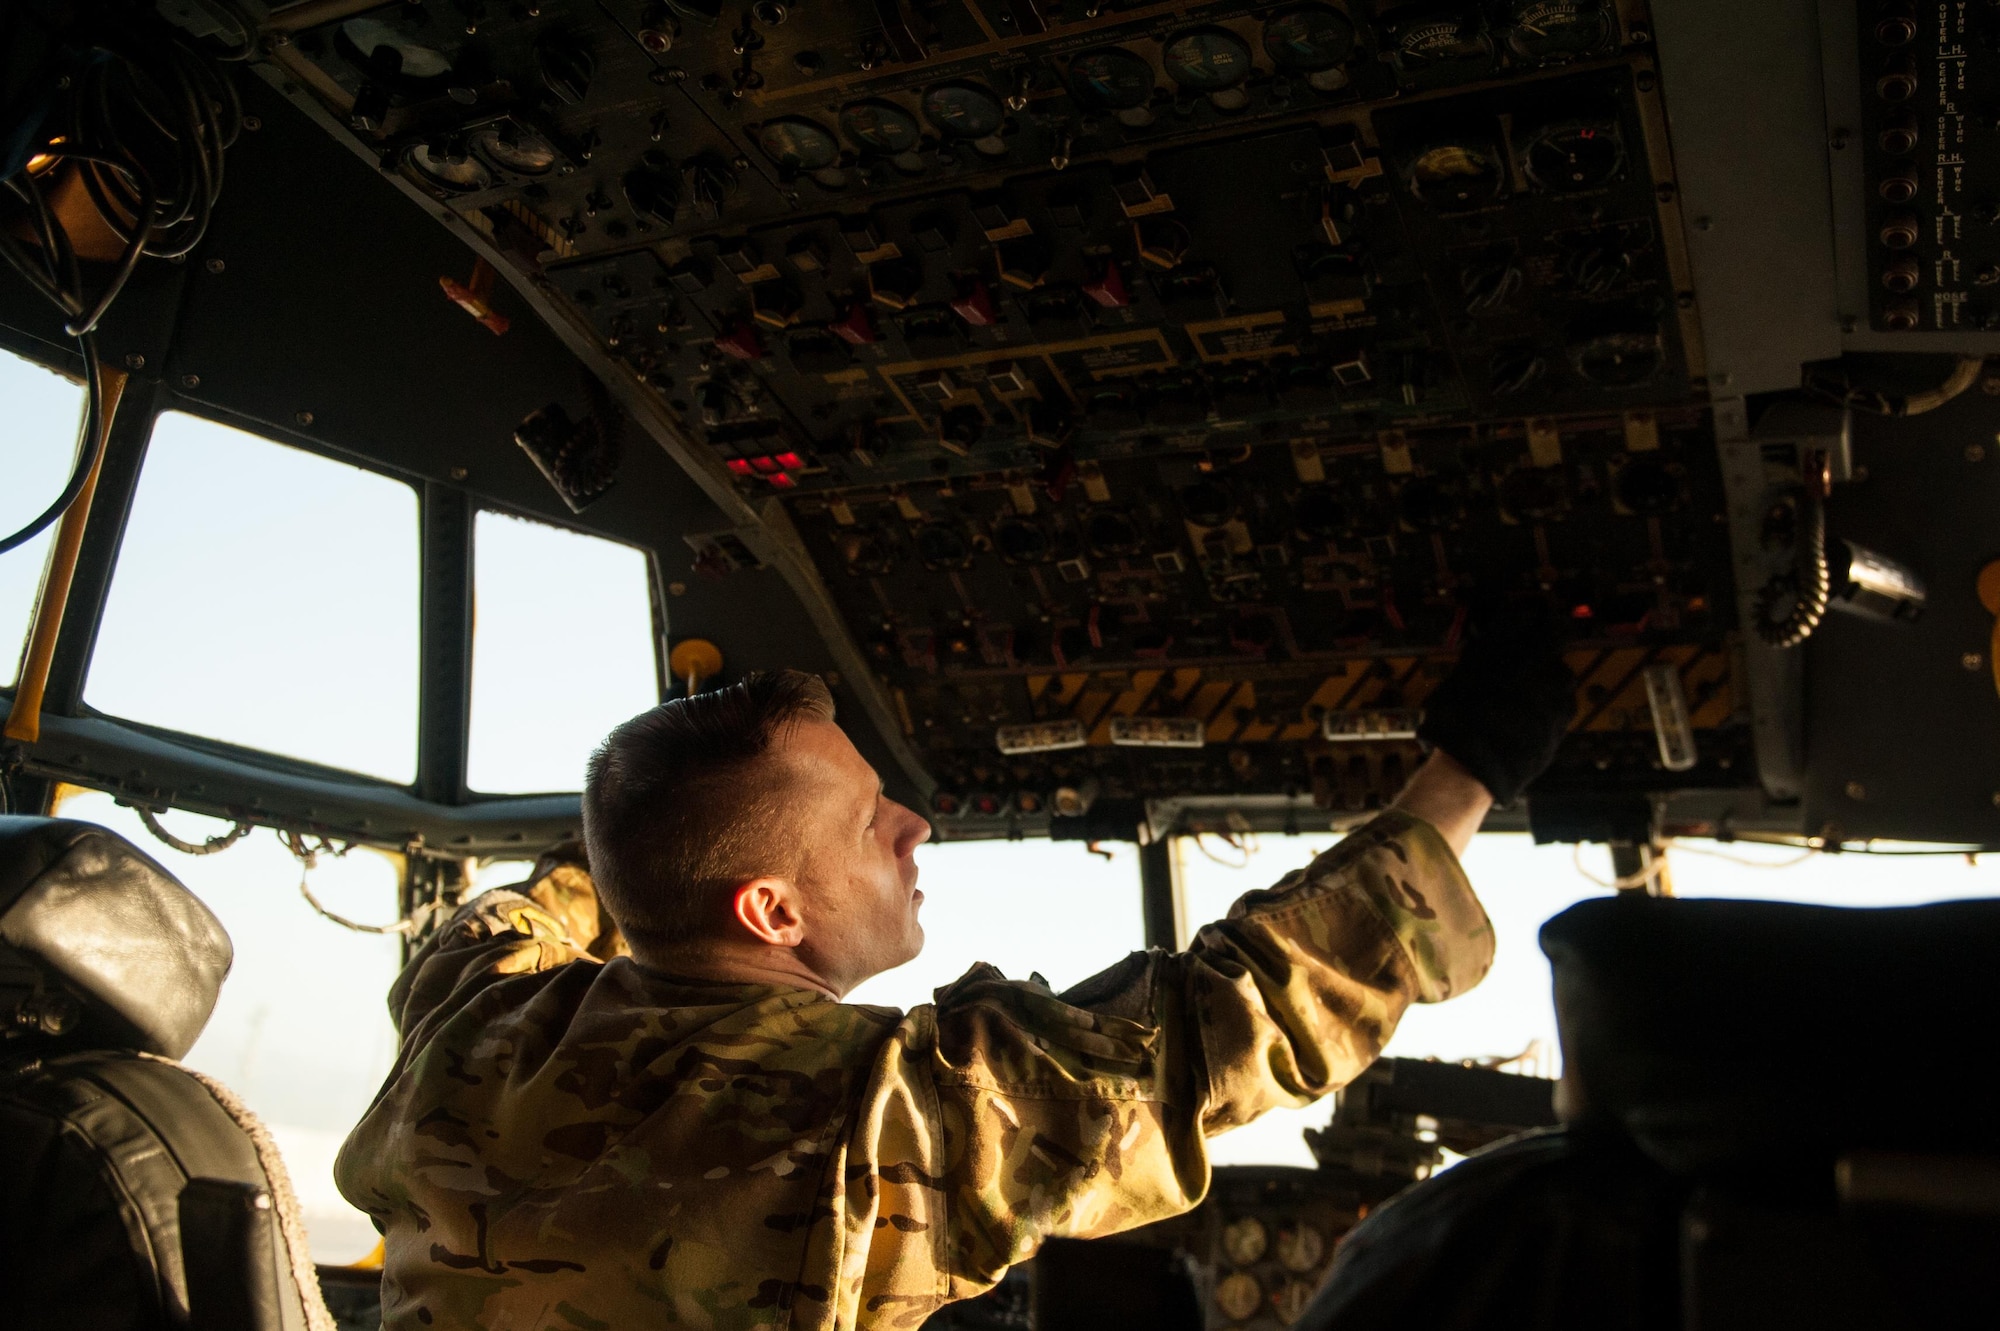 U.S. Air Force Tech. Sgt. John Rorie, 41st Expeditionary Electronic Combat Squadron flight engineer, completes a post flight inspection on an EC-130H Compass Call aircraft at Bagram Airfield, Afghanistan, Sept. 6, 2015. The Compass Call is an airborne tactical weapon system using a heavily modified version of the C-130 Hercules airframe. (U.S. Air Force photo by Tech. Sgt. Joseph Swafford/Released)